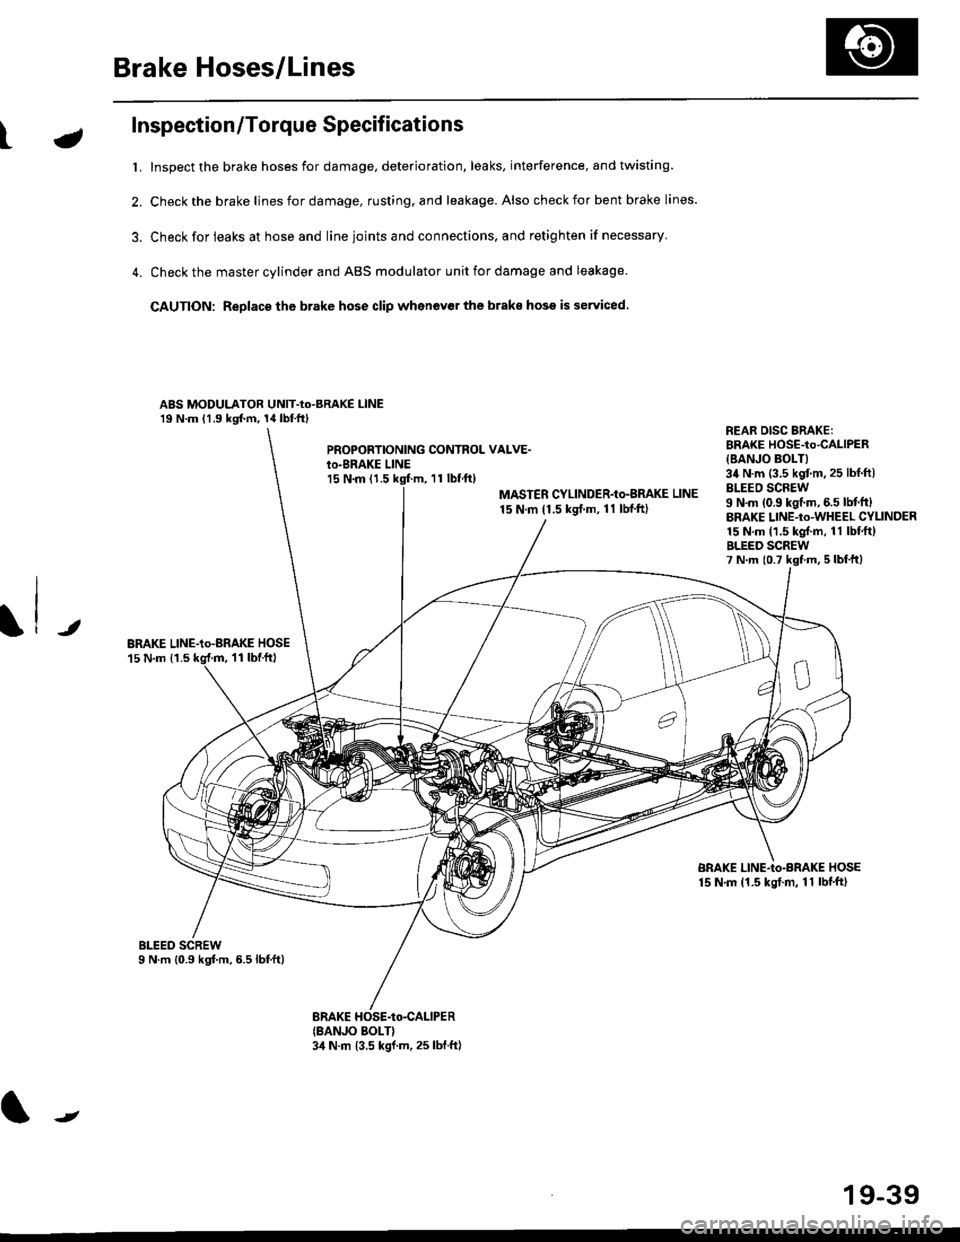 HONDA CIVIC 1996 6.G Owners Manual Brake Hoses/Lines
LJ
Inspection/Torque Specifications
t. Inspect the brake hoses for damage, deterioration, leaks, interference, and twisting.
2. Check the brake lines for damage, rusting. and leakage